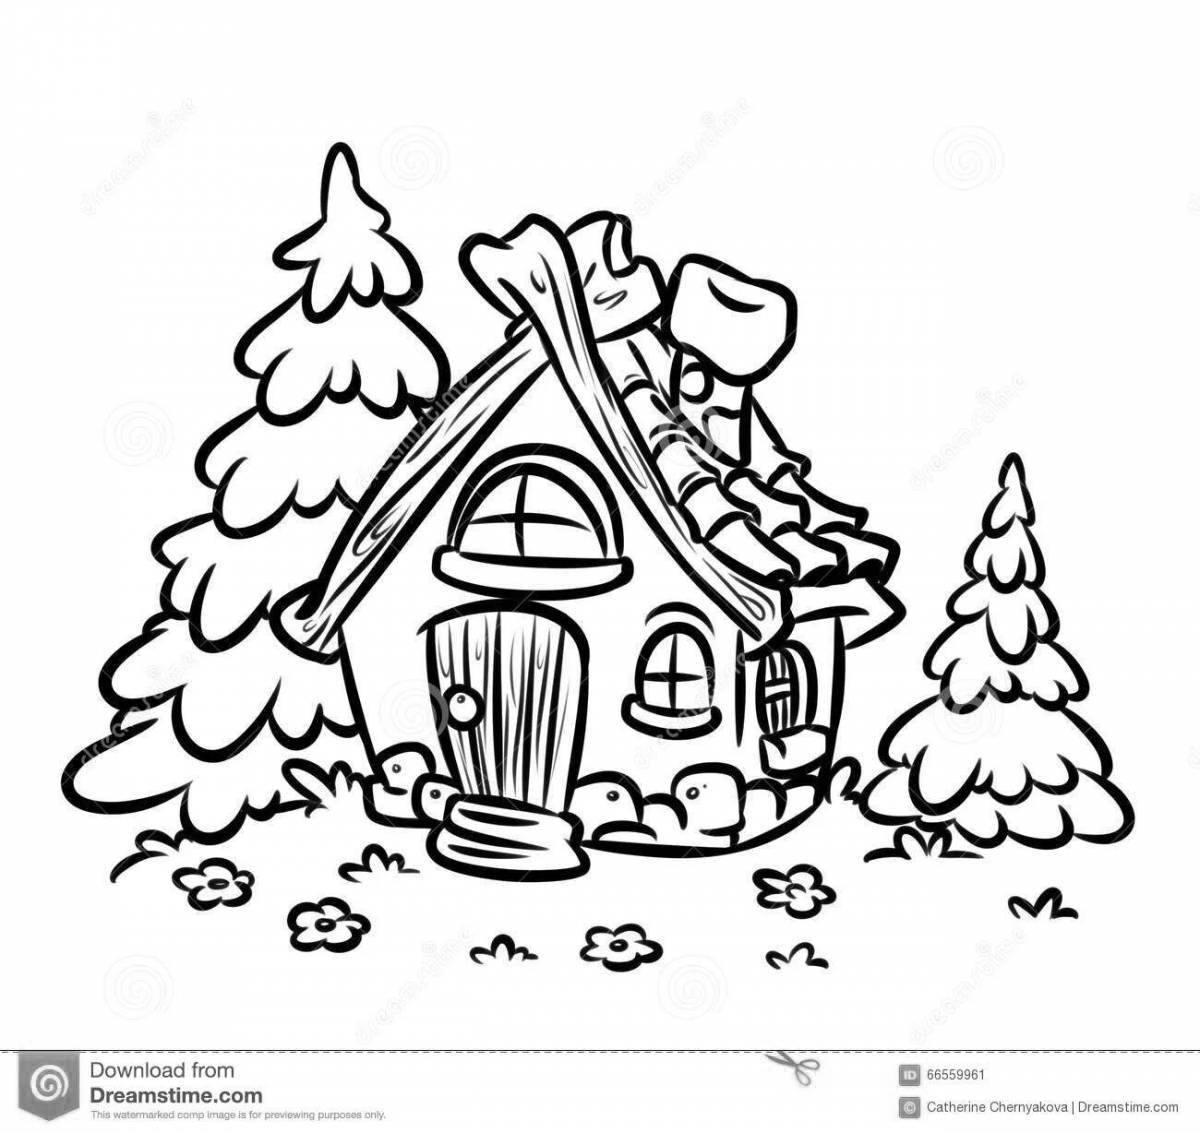 Fancy ice hut coloring page